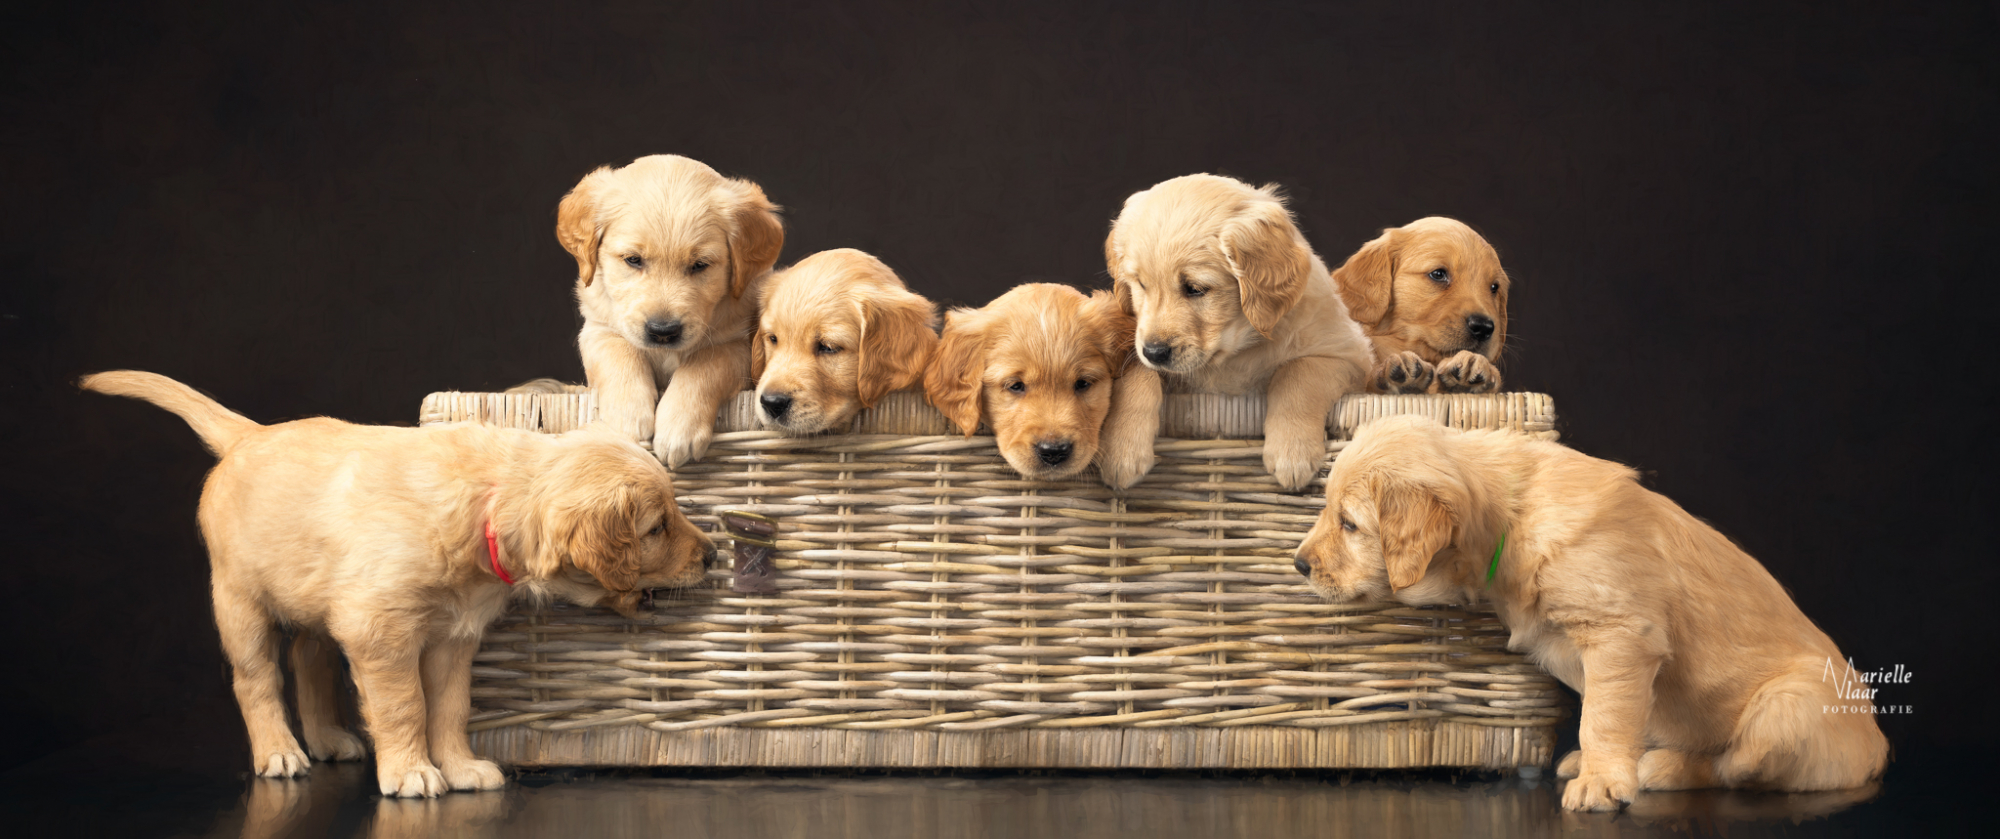 Goldentrtriever pups in mand